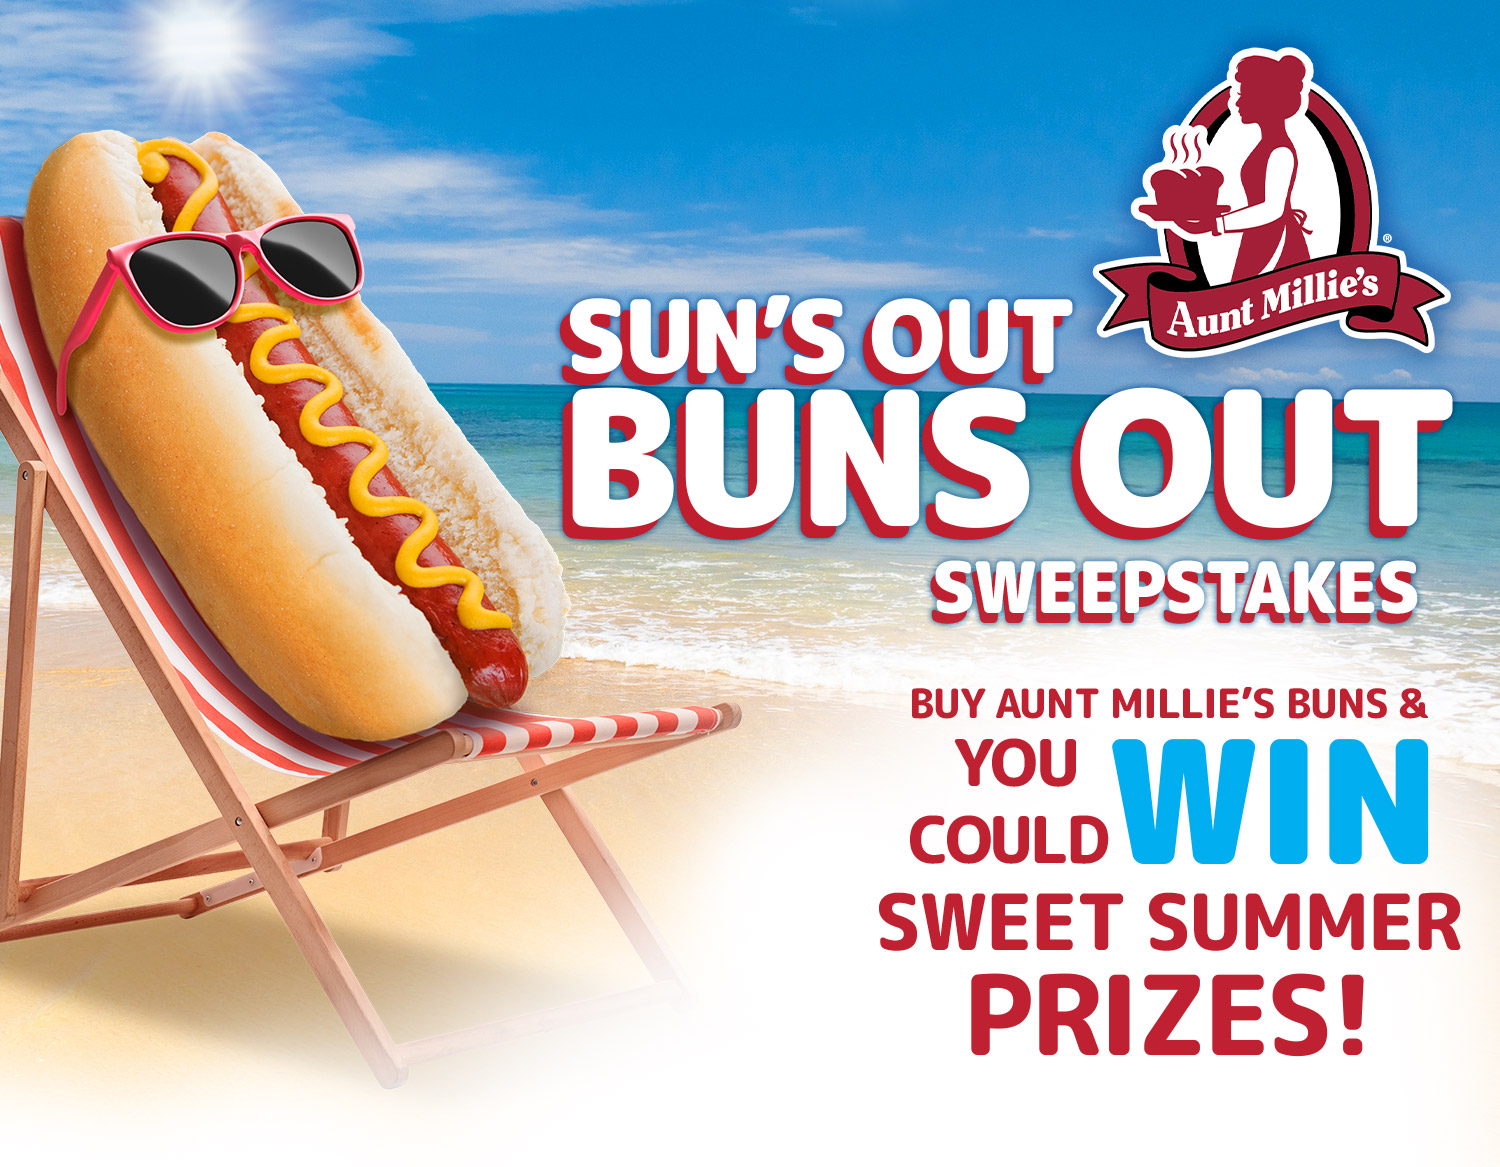 Sun's Out Buns Out Sweepstakes. Buy Aunt Millie's Buns and You Could Win Sweet Summer Prizes!